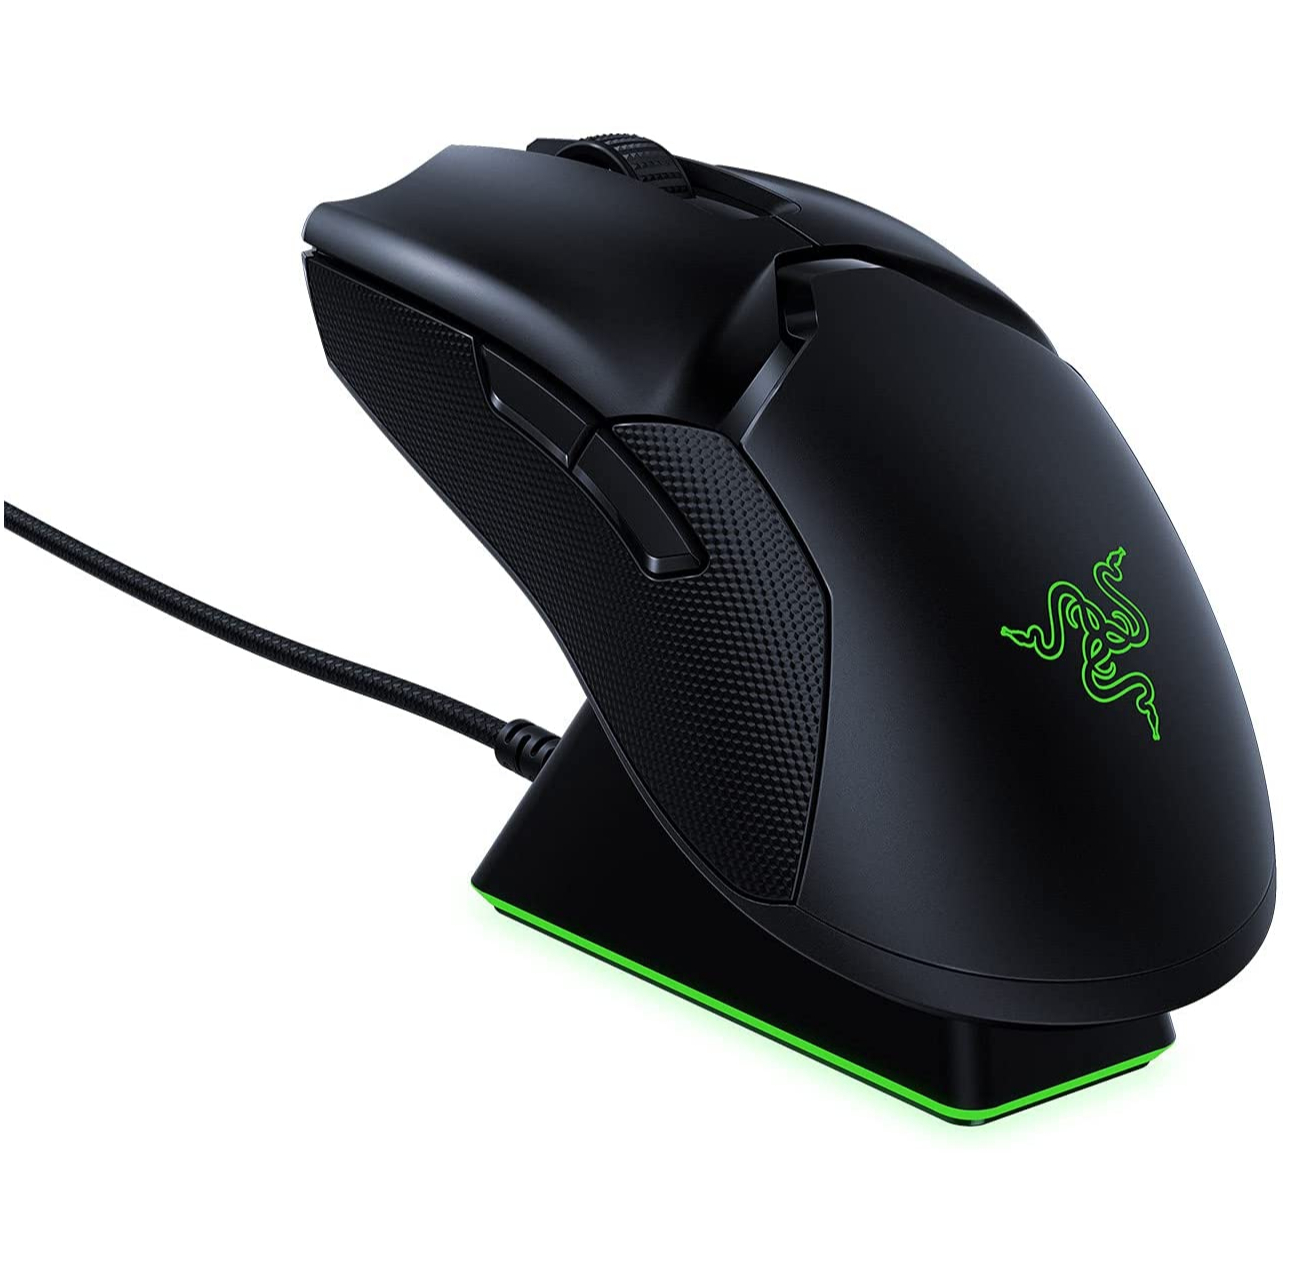 This Razer Viper Ultimate wireless mouse absolutely slaps at £63